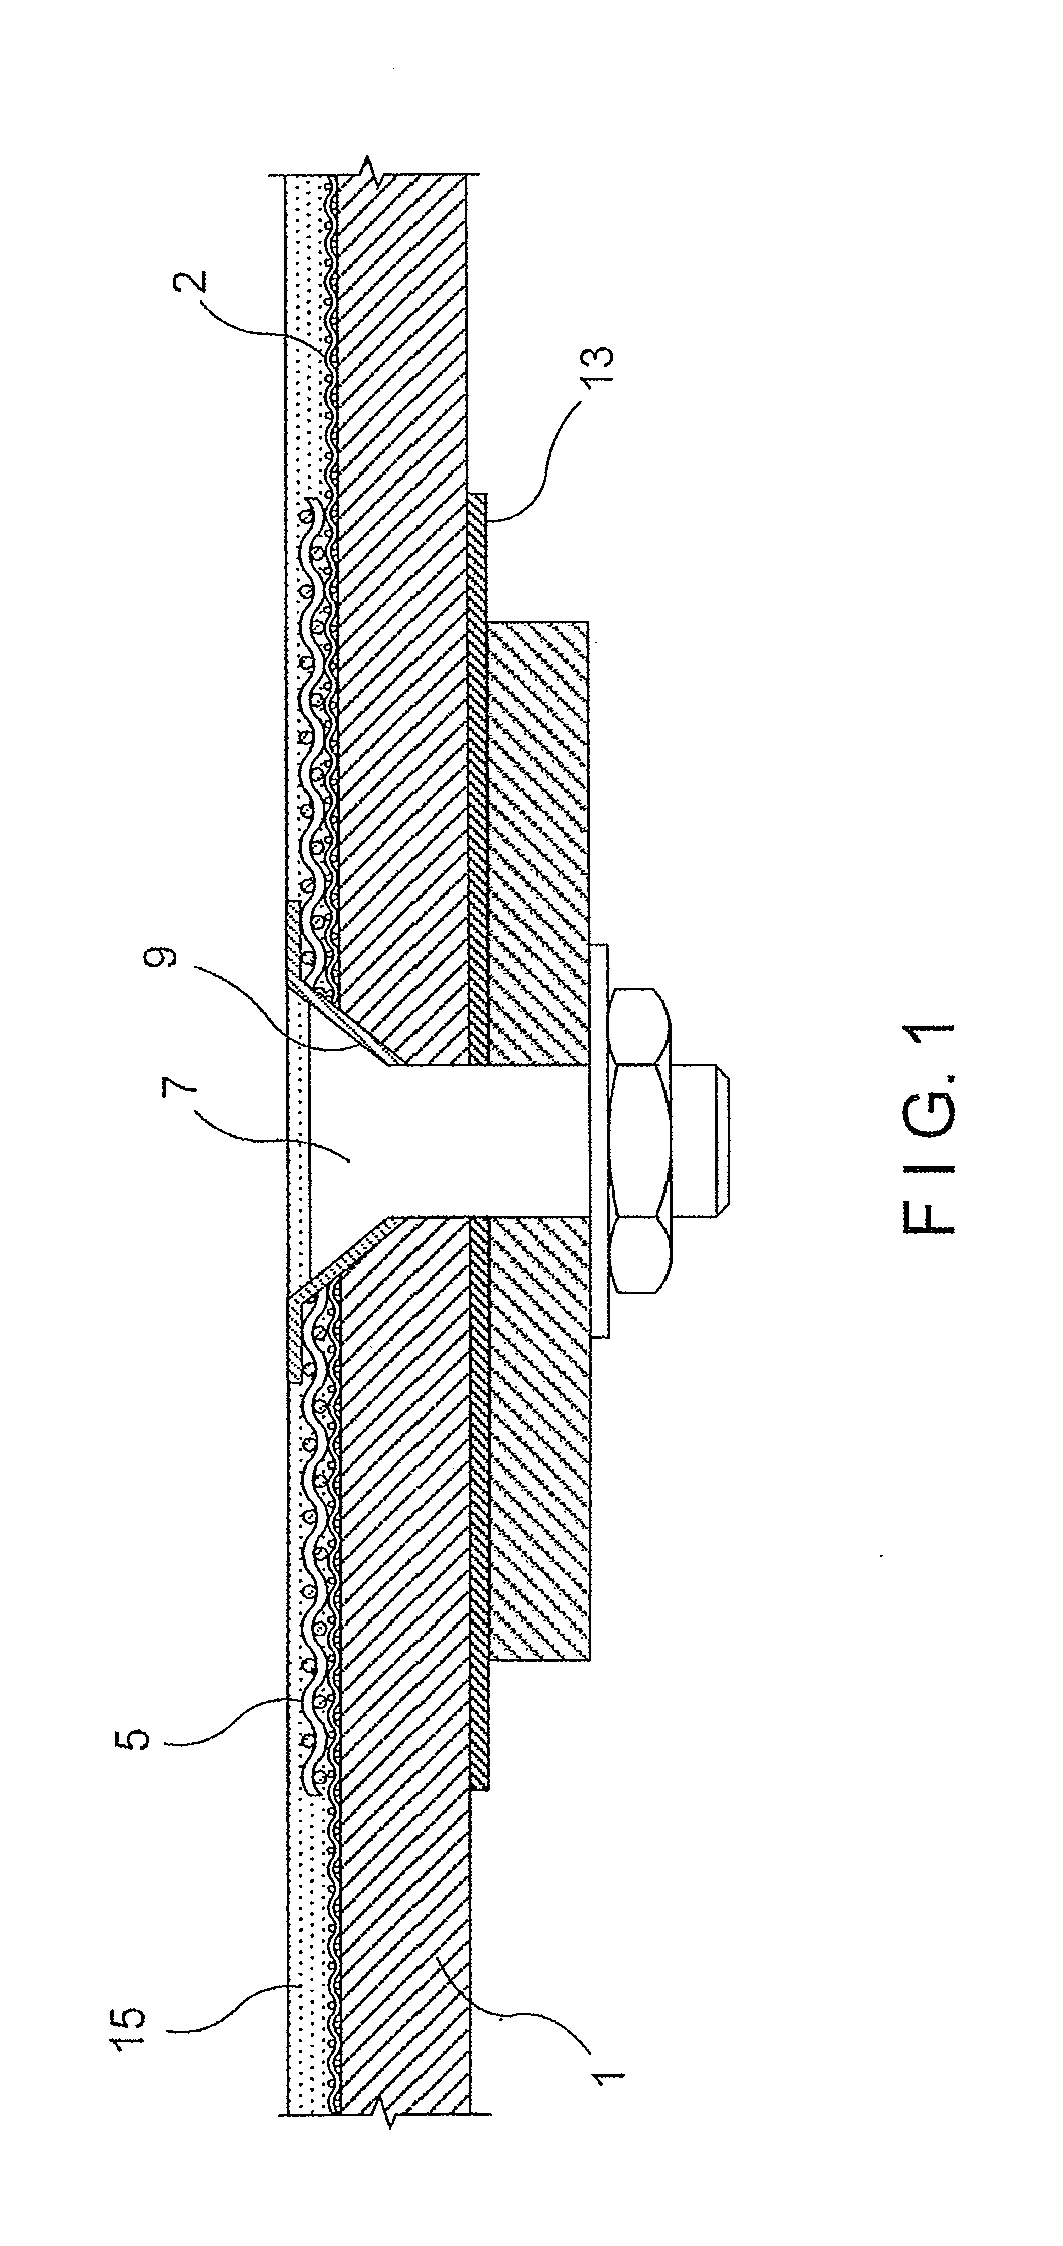 Protection device against electrical discharges in aircraft